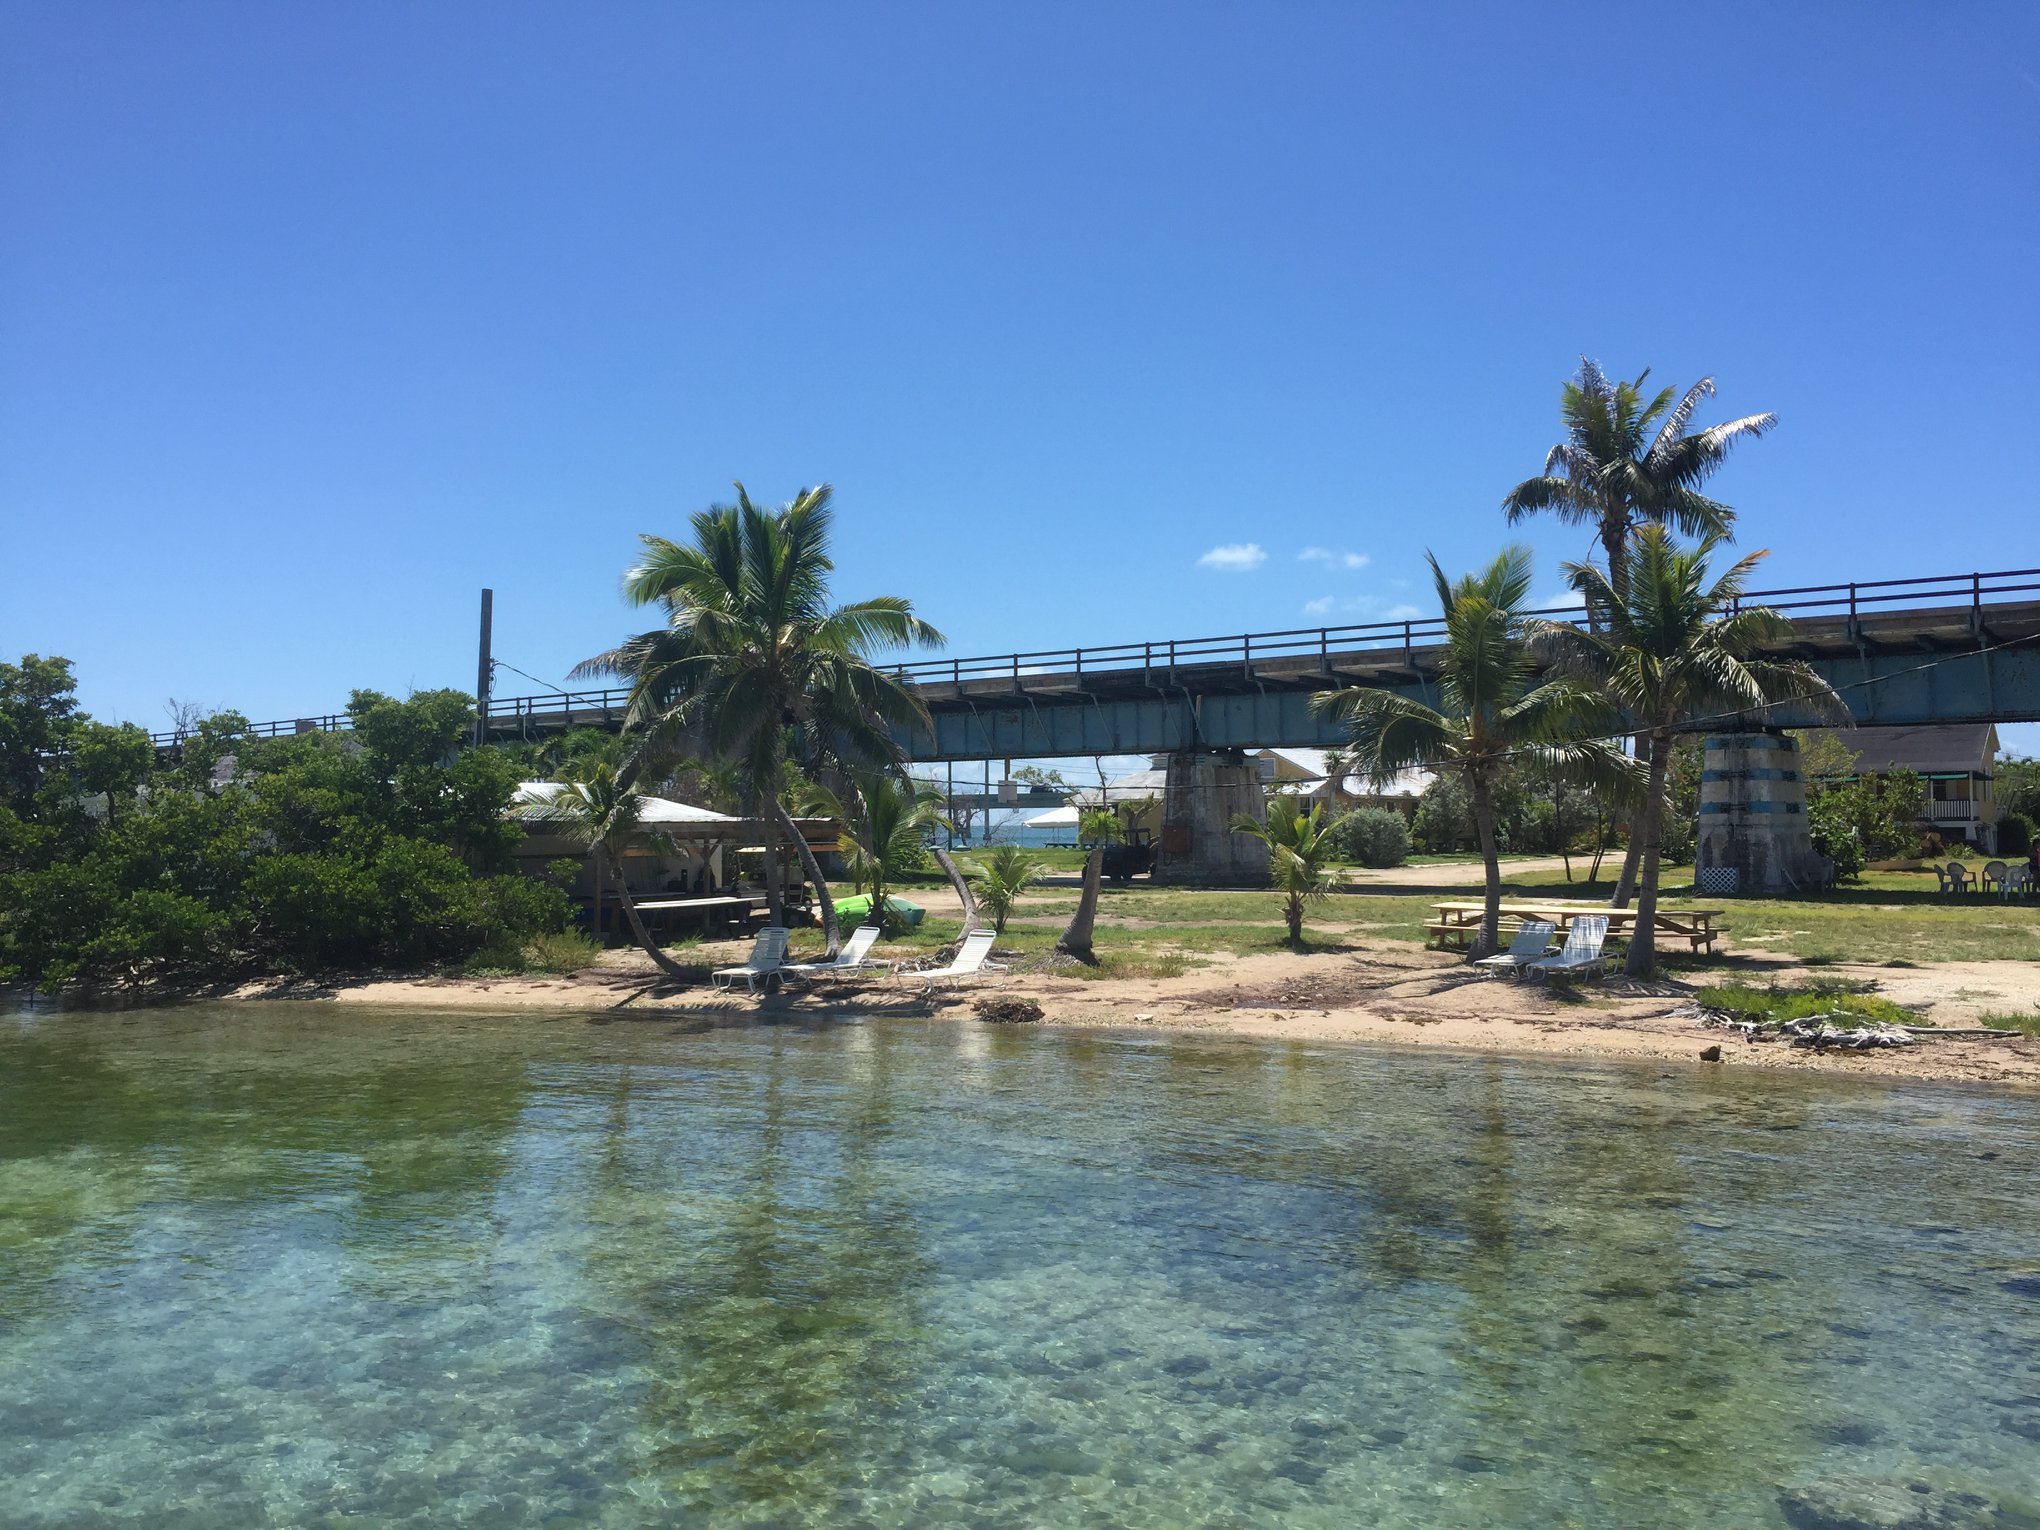 World-famous Pigeon Key is a small island beneath the Old Seven Mile Bridge that housed workers constructing the Florida Keys Over-Sea Railroad in the early 1900s. 